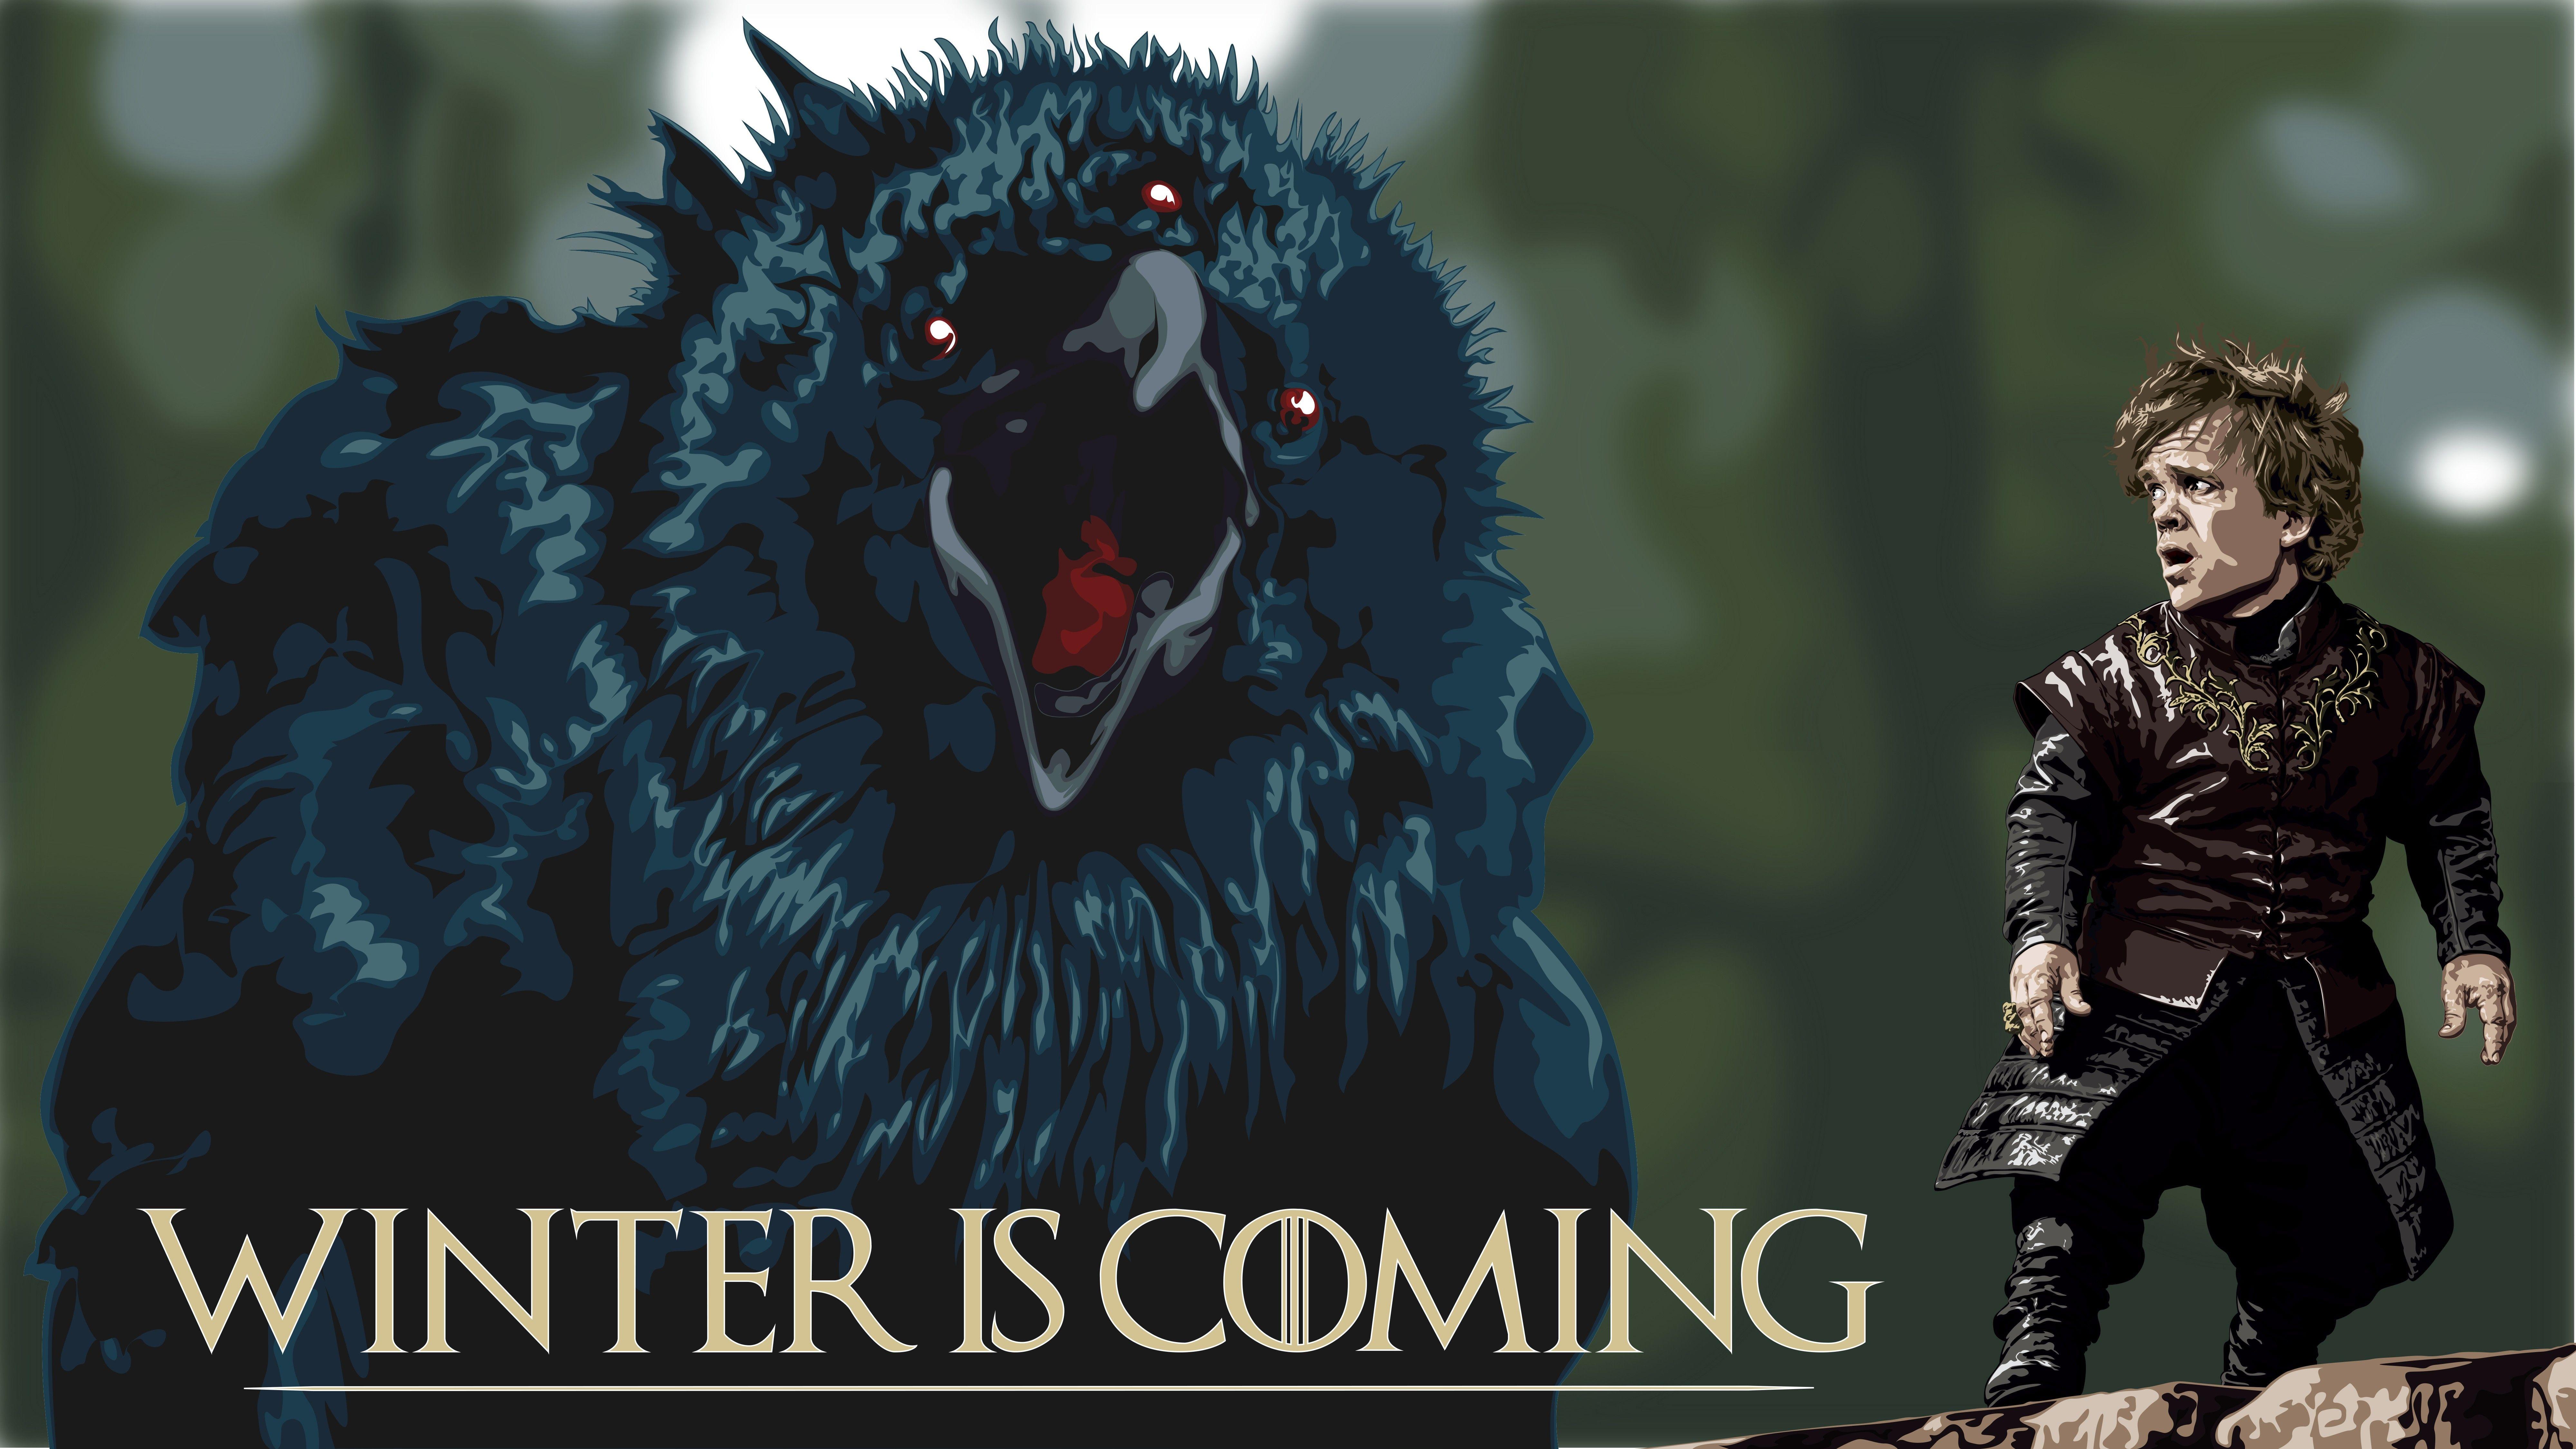 Game Of Thrones, Winter Is Coming, Crow, Three Eyed Crow, Tyrion